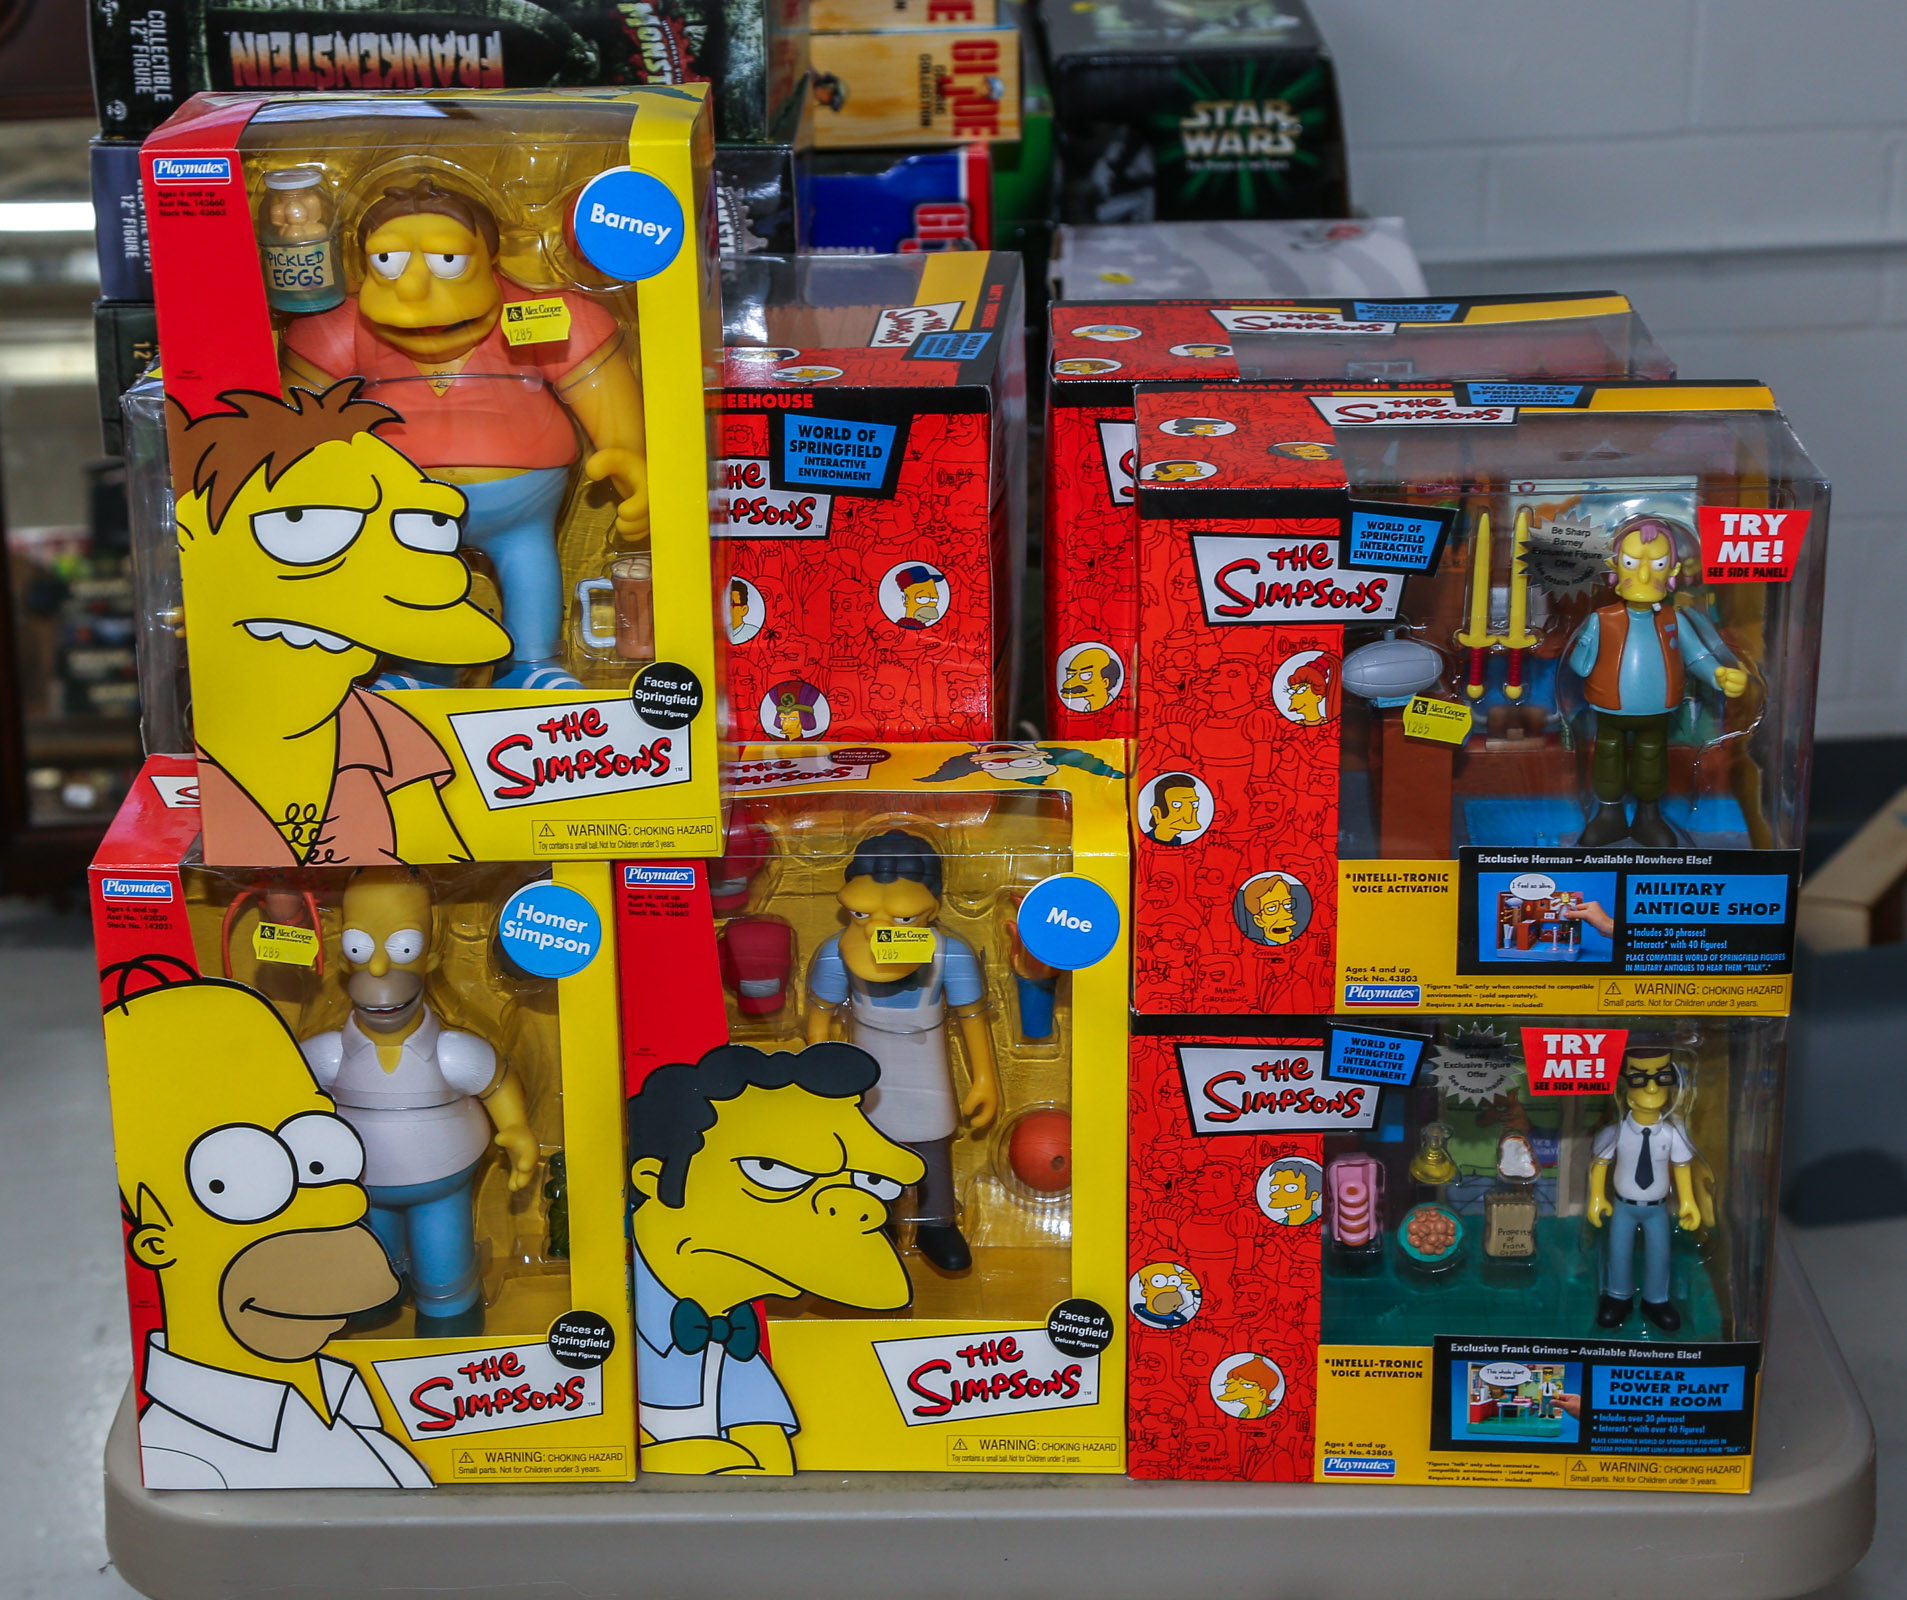 ELEVEN "THE SIMPSONS" FIGURINES